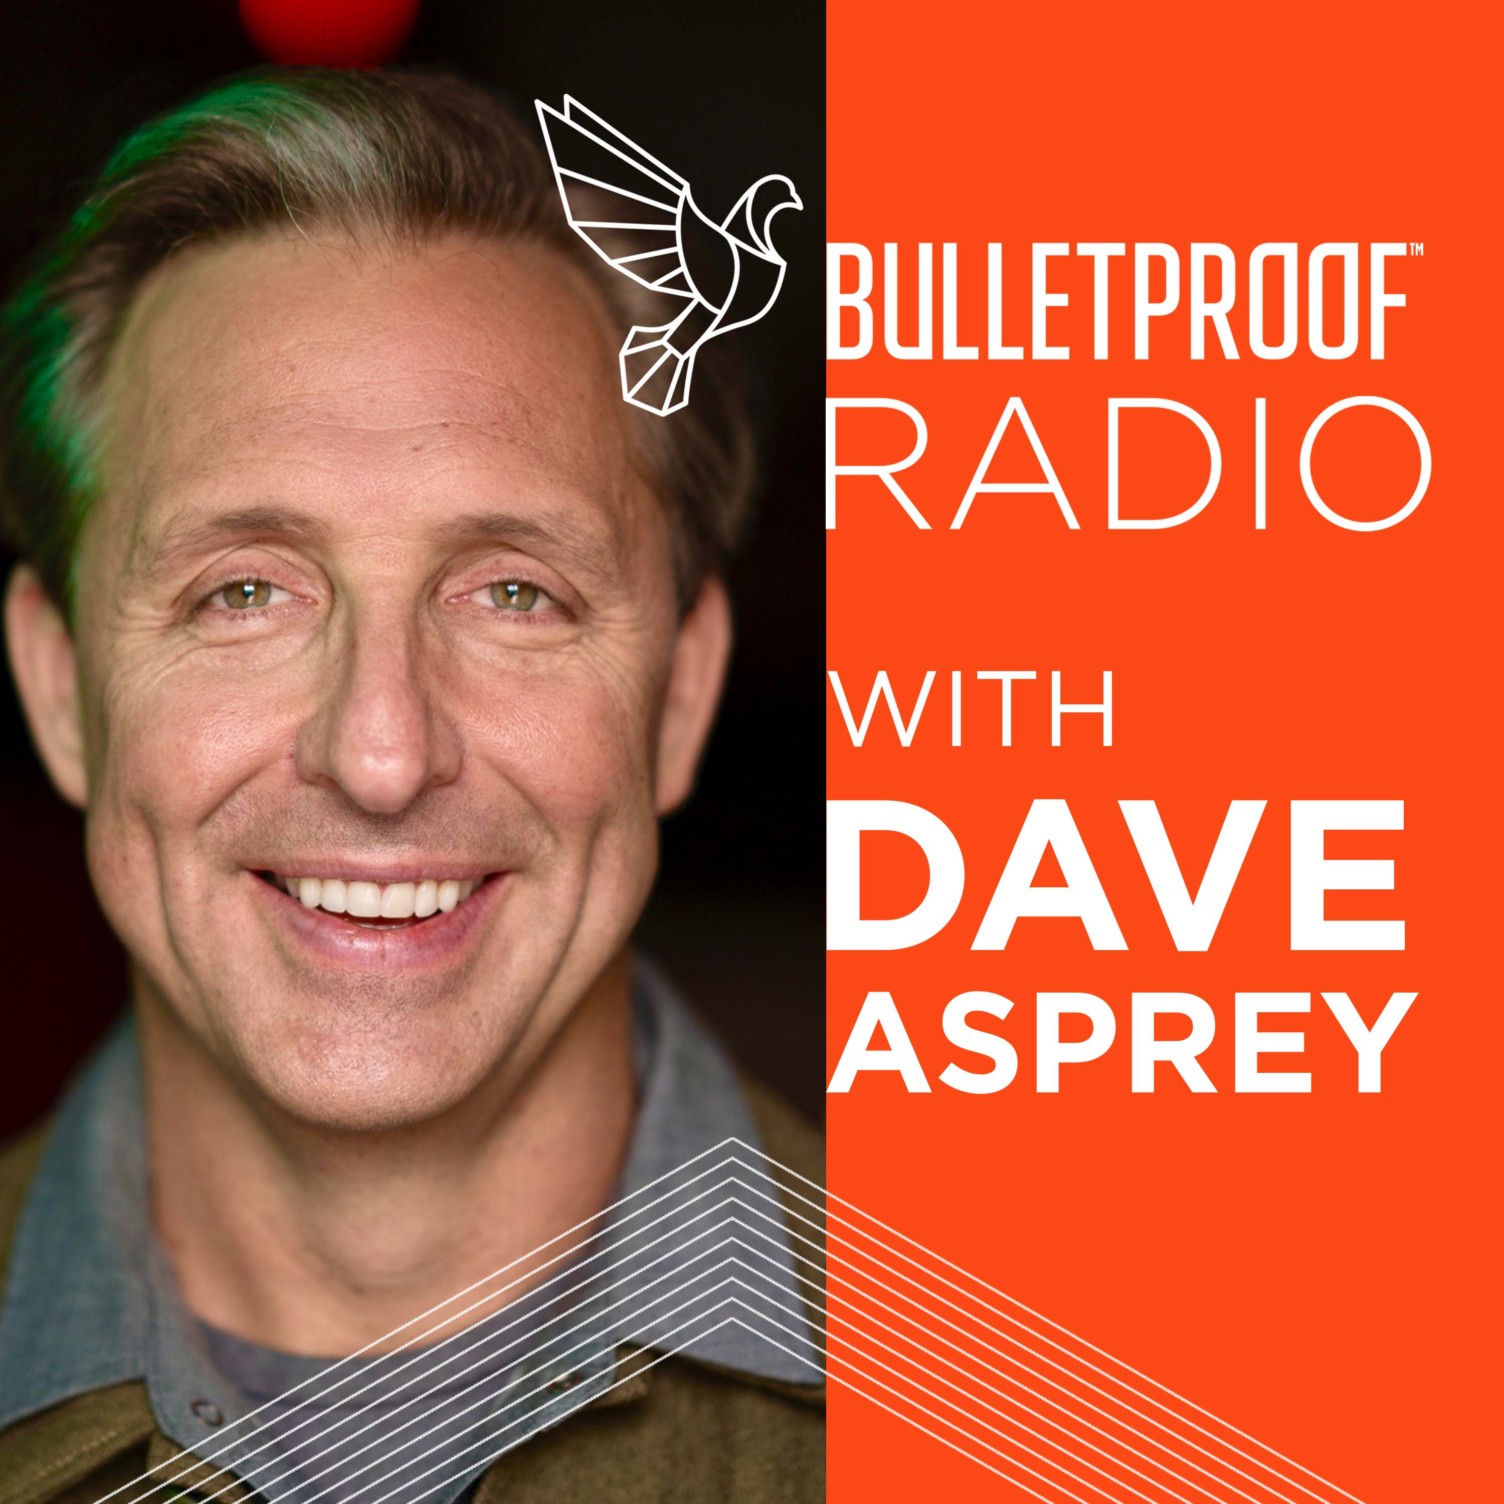 How To Download Podcasts and Subscribe To Bulletproof Radio